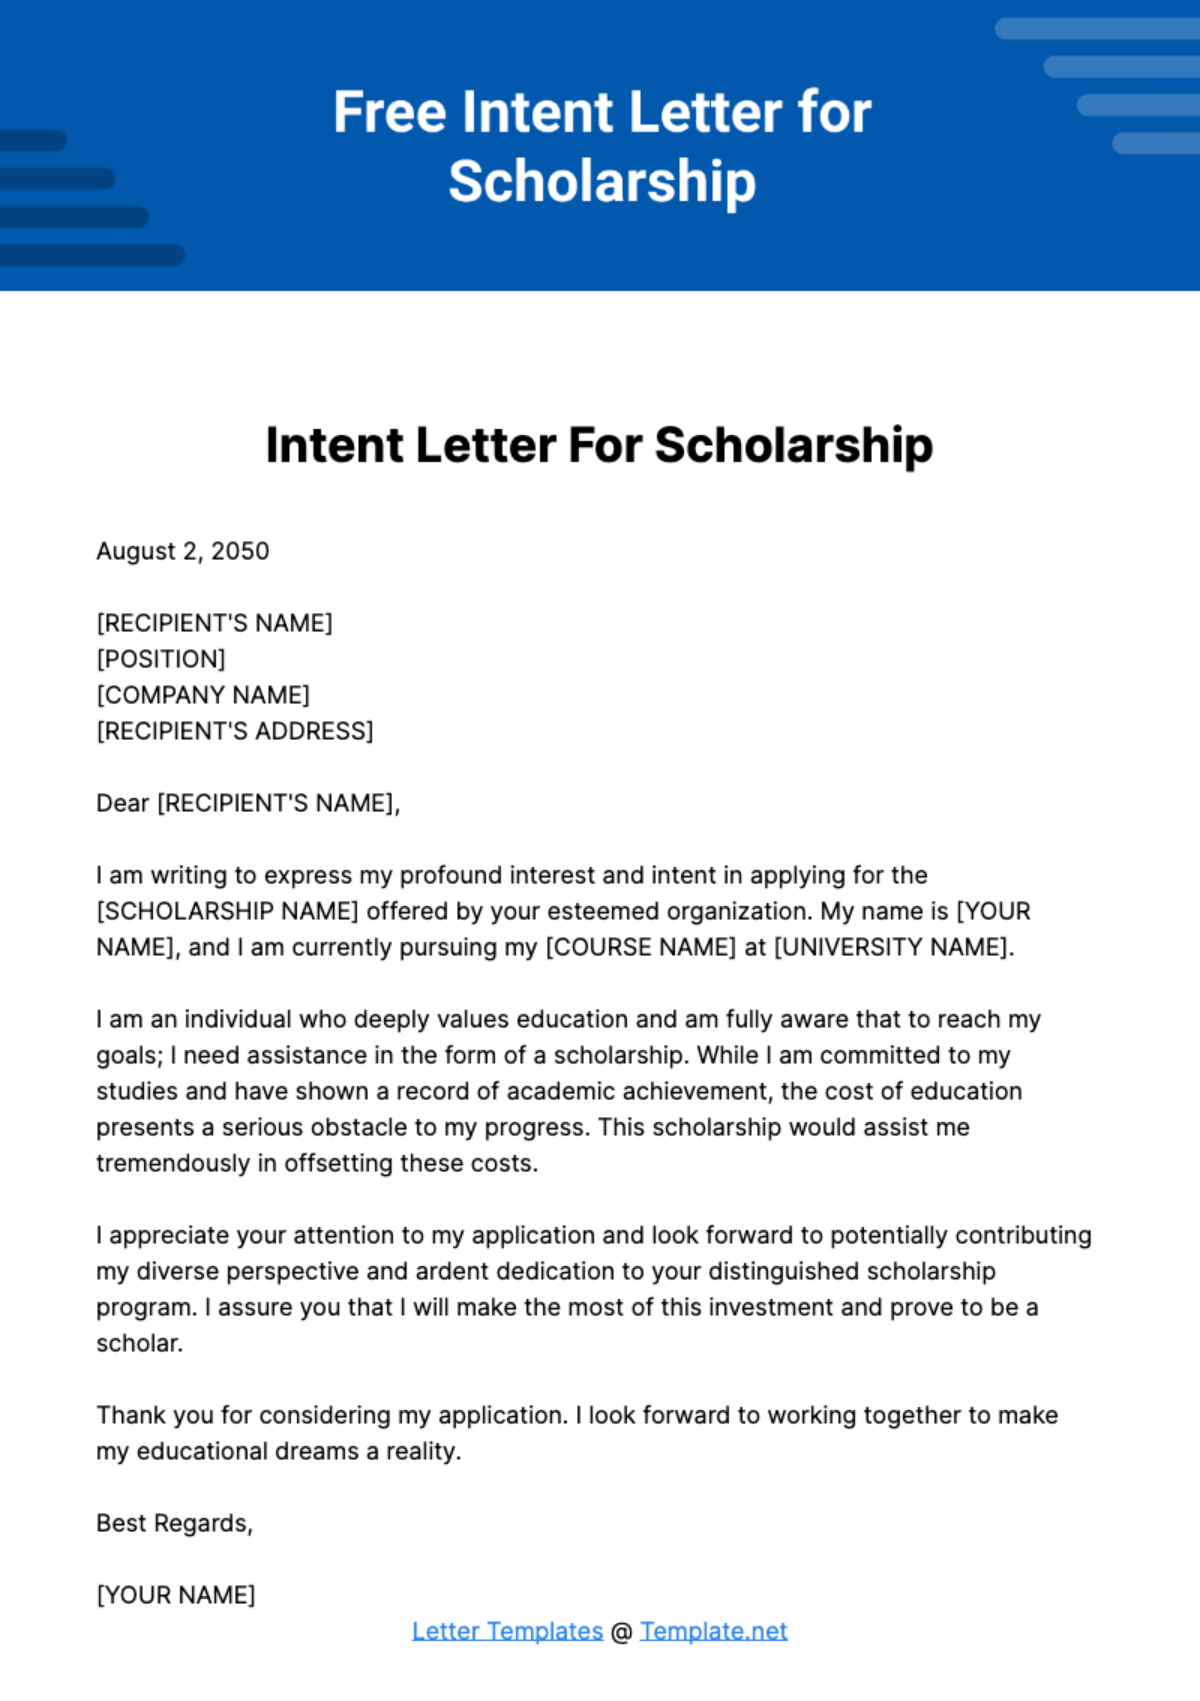 Free Intent Letter for Scholarship Template